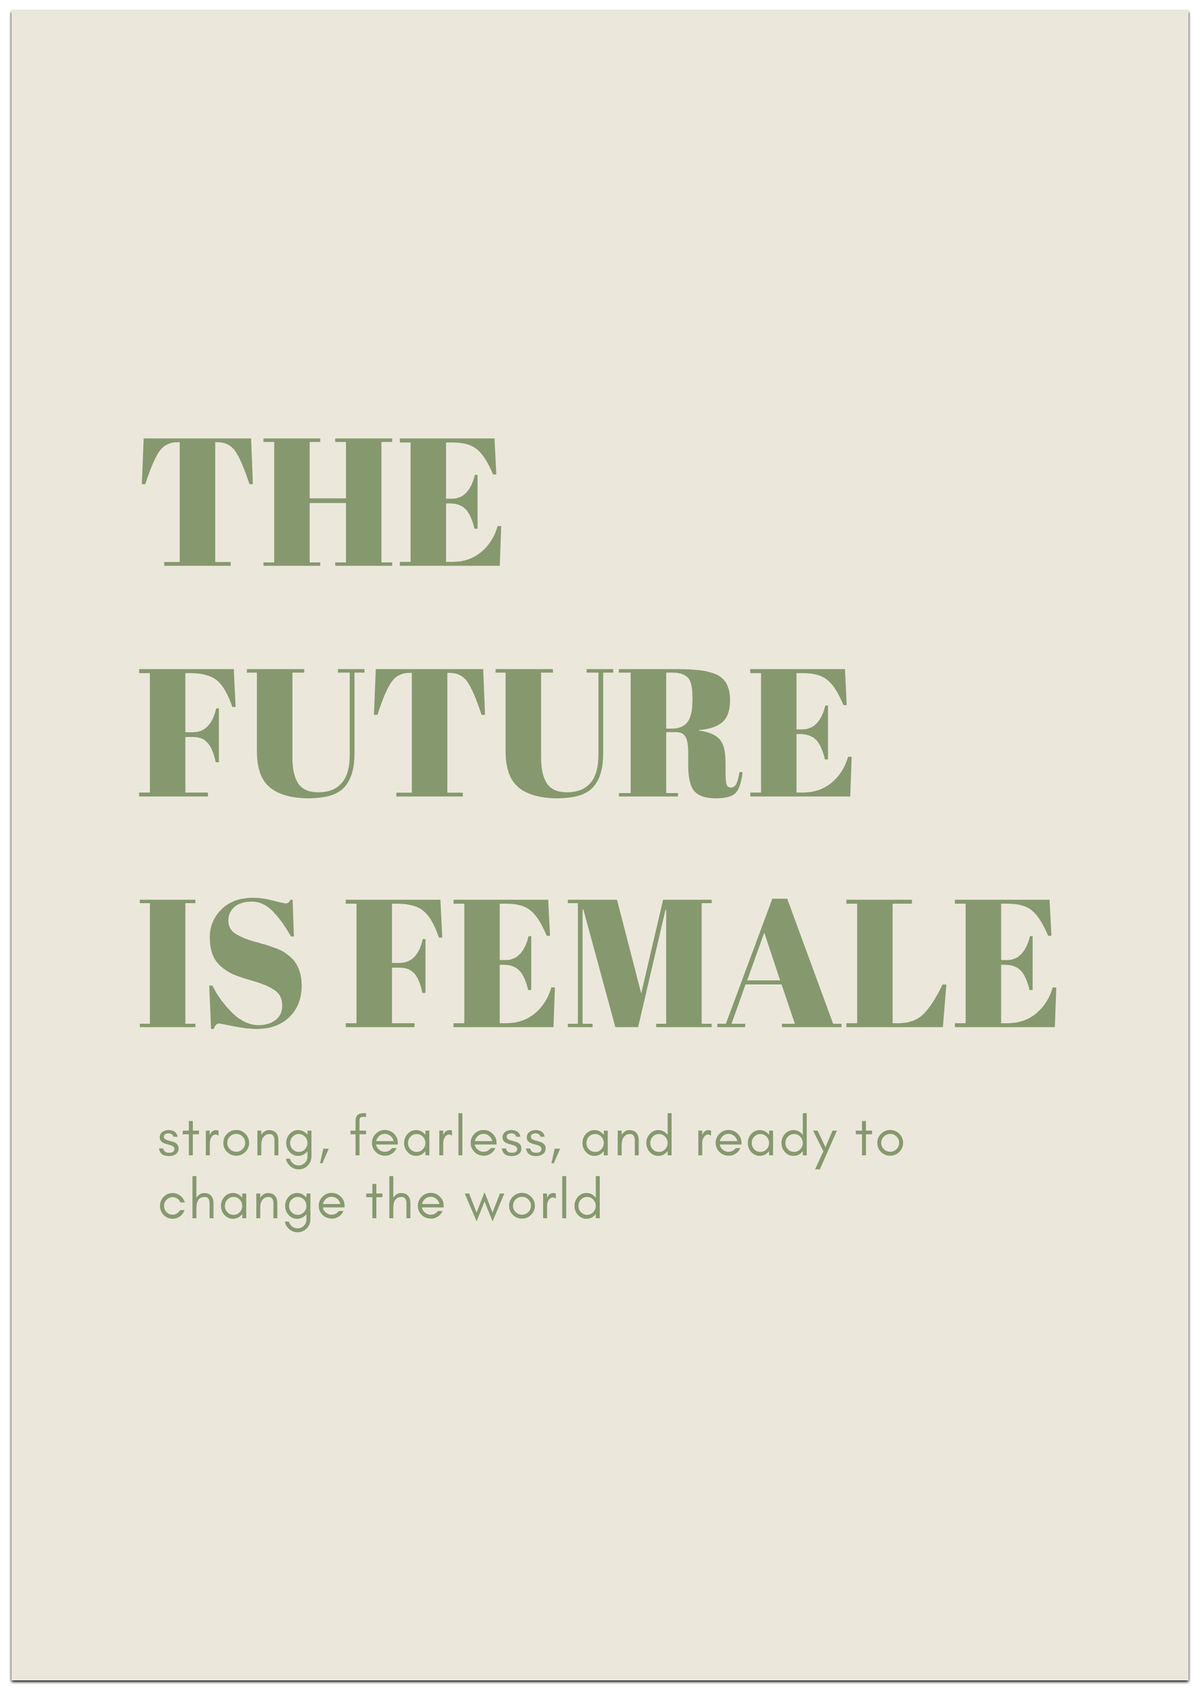 The Future is Female Poster